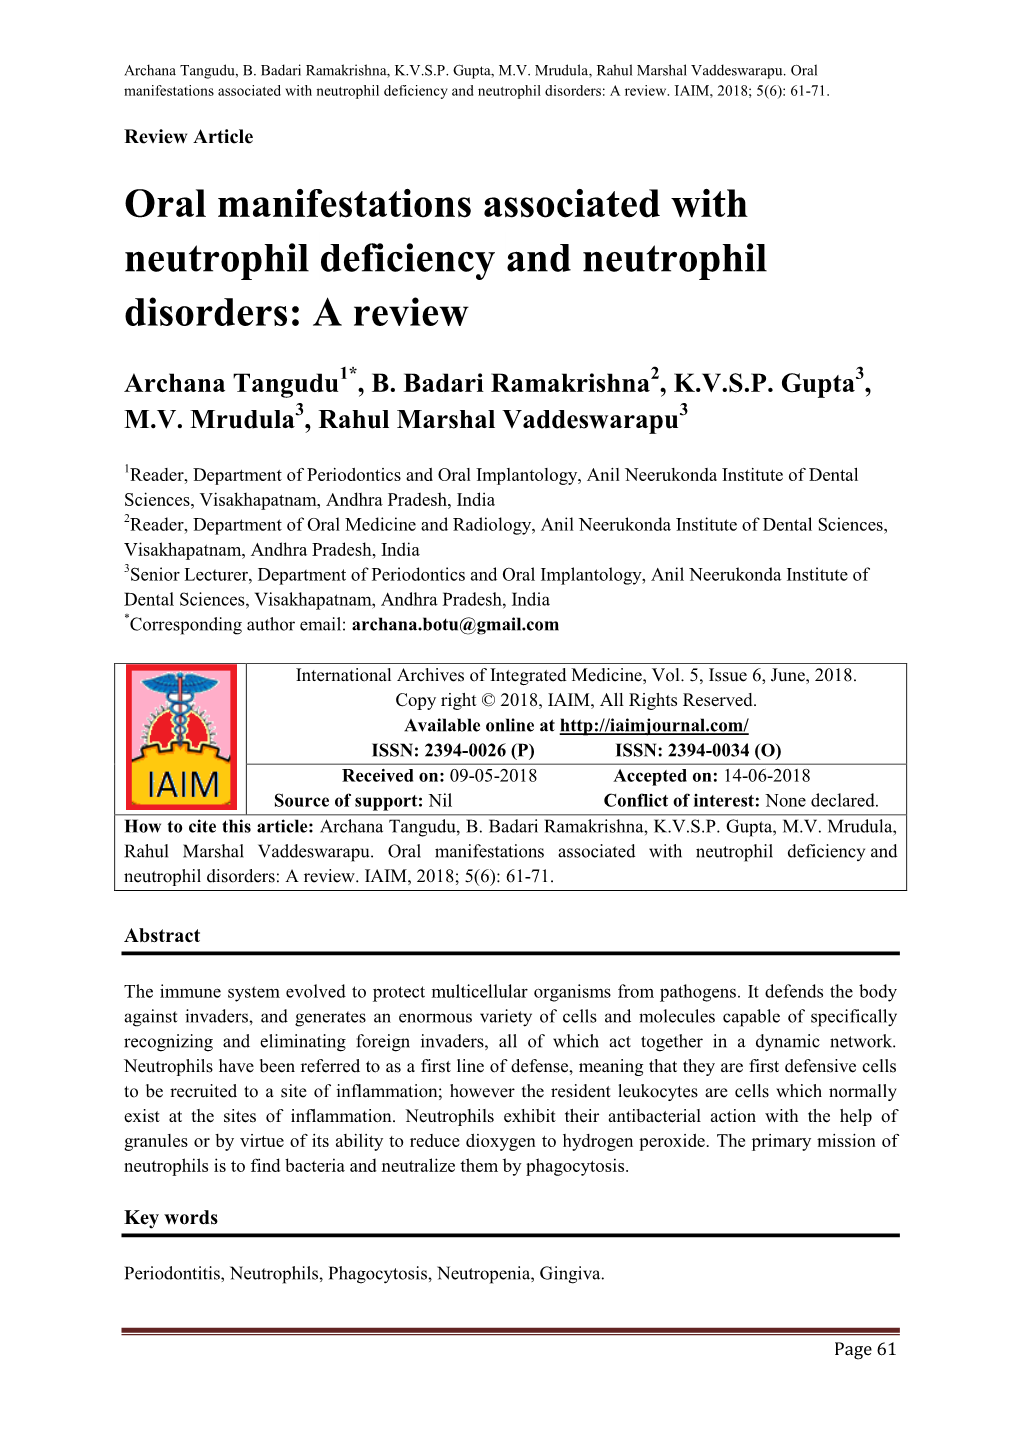 Oral Manifestations Associated with Neutrophil Deficiency and Neutrophil Disorders: a Review